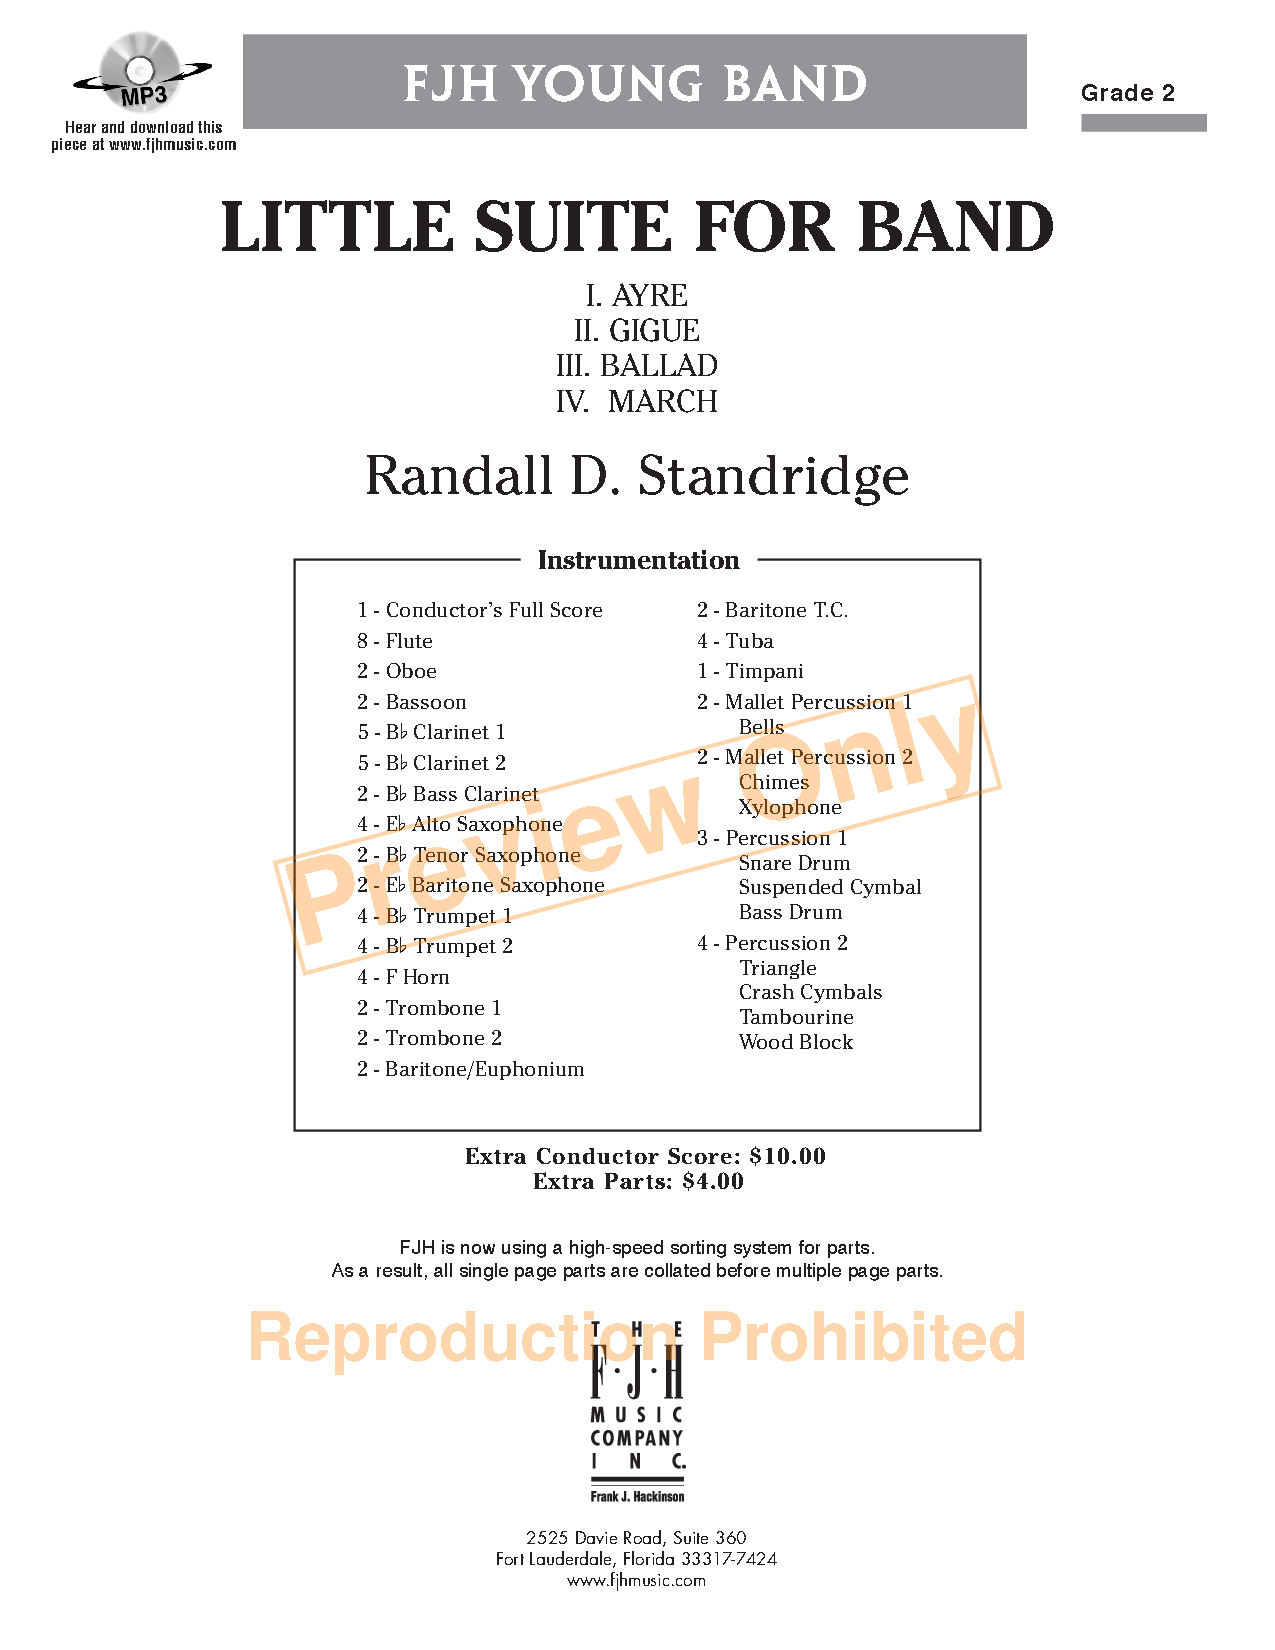 Little Suite for Band